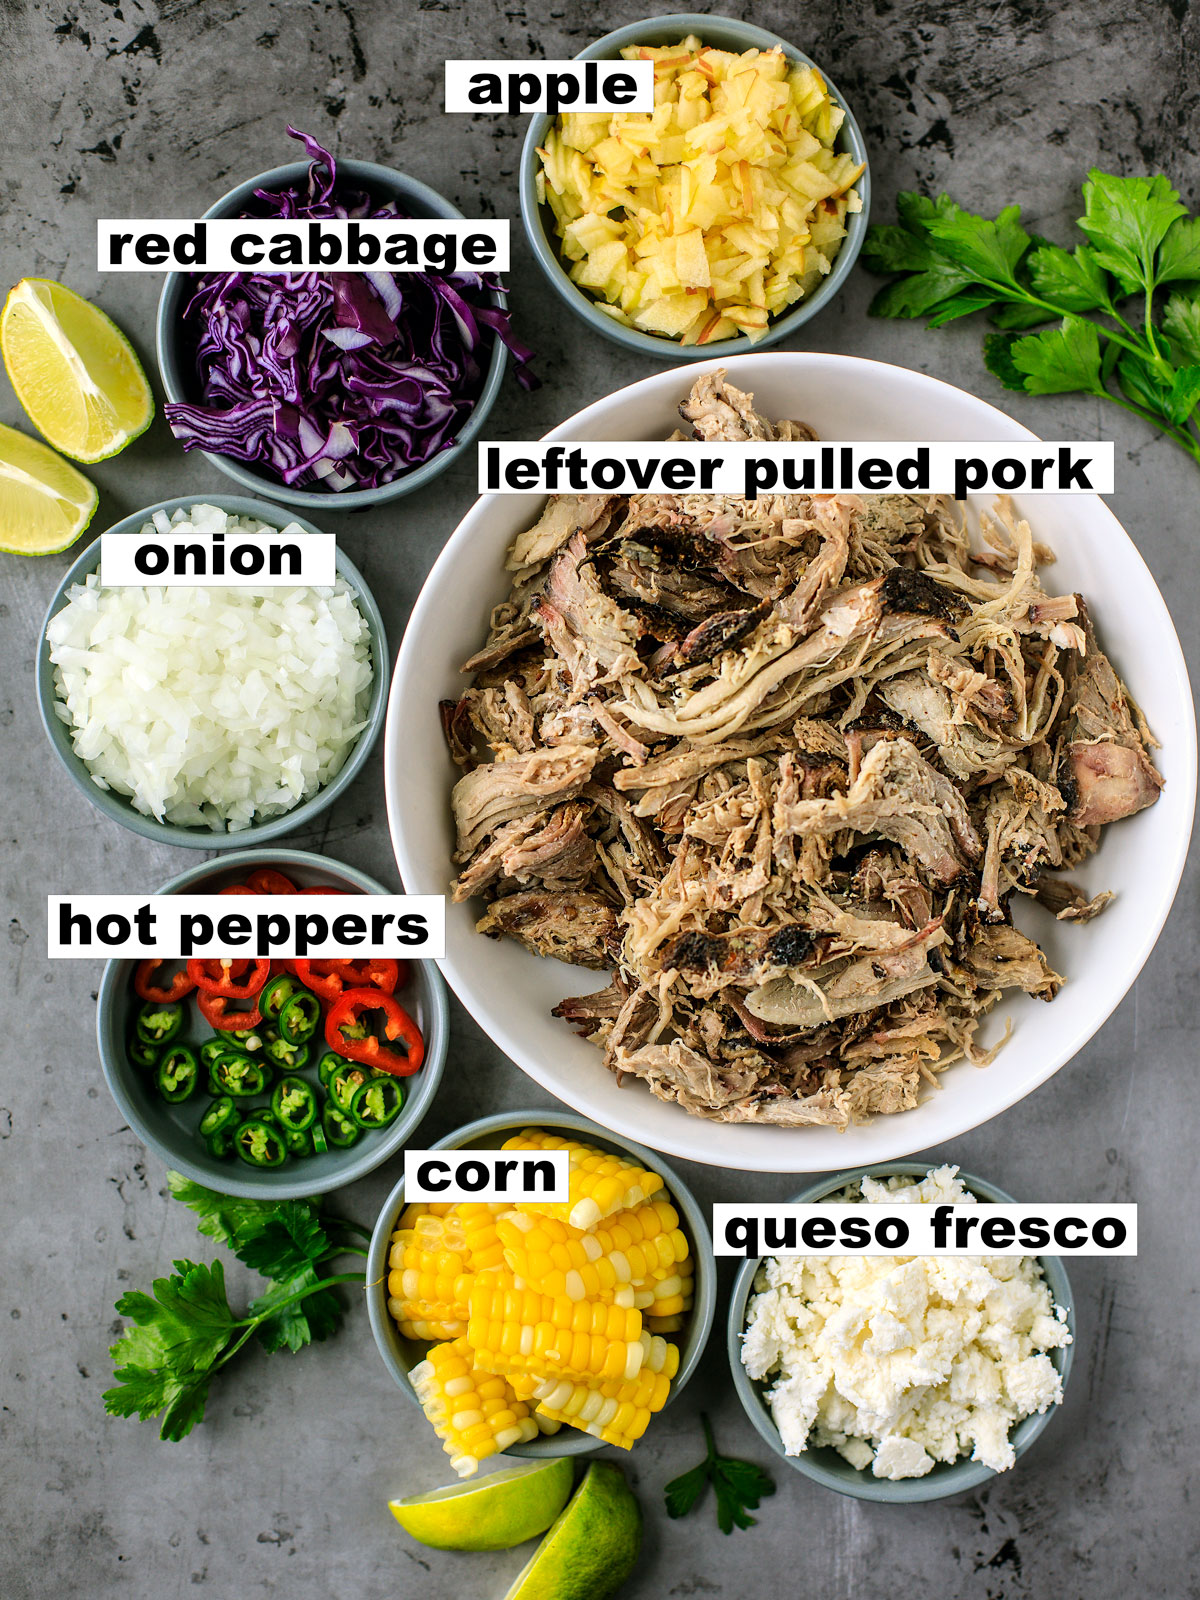 Flatlay shot of ingredients: pulled pork, apple, red cabbage, onion, hot peppers, corn, queso fresco, limes, and cilantro.